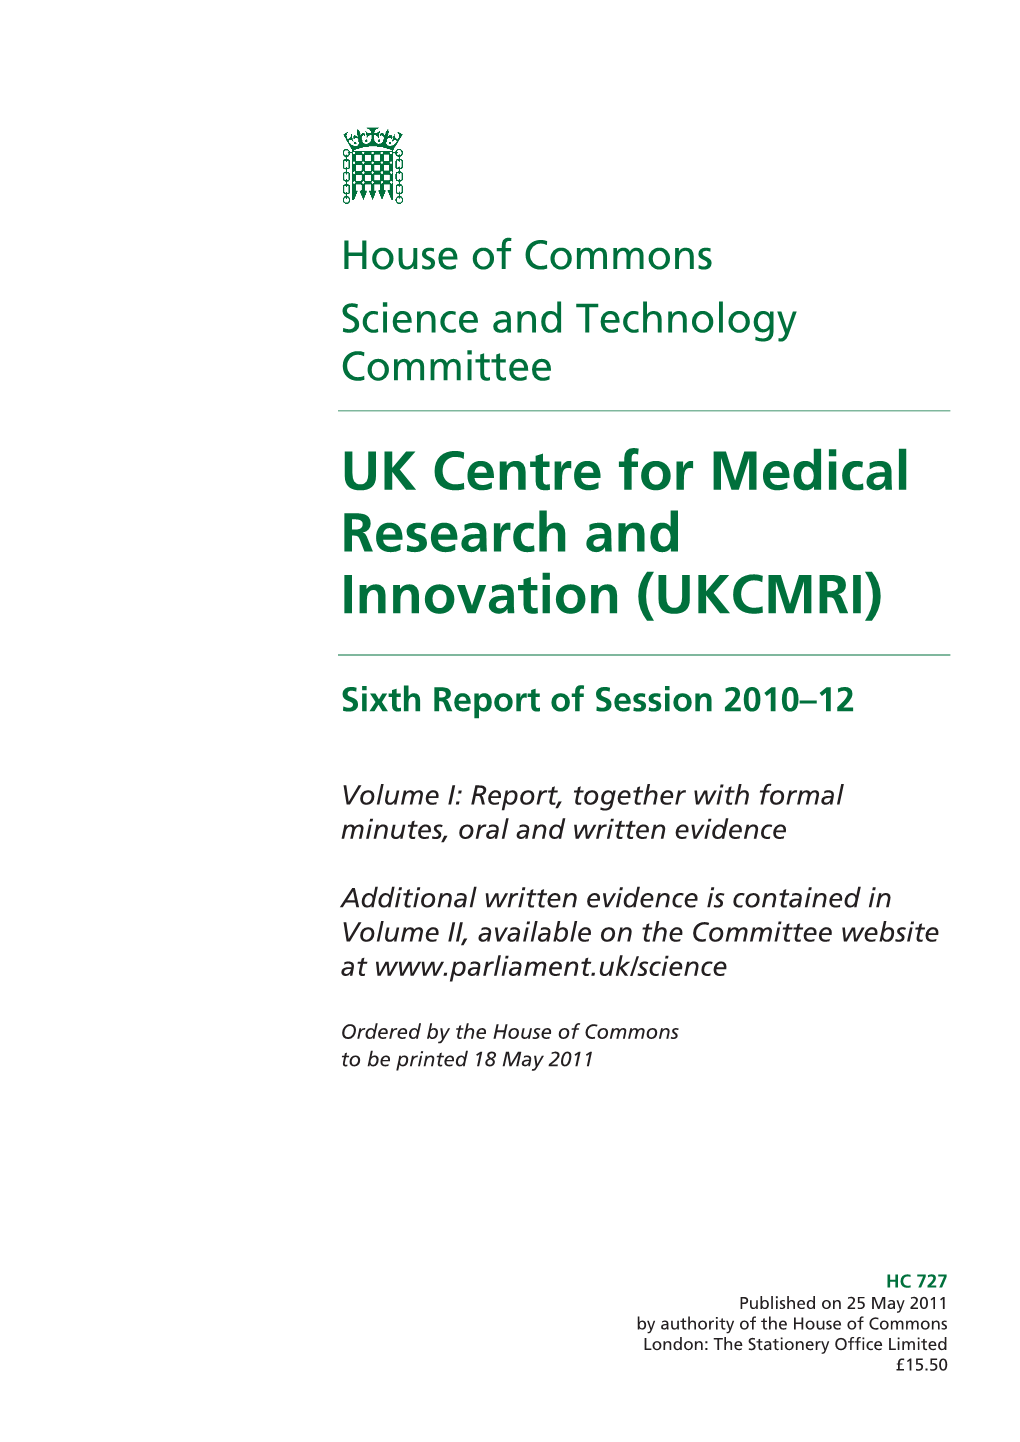 UK Centre for Medical Research and Innovation (UKCMRI)